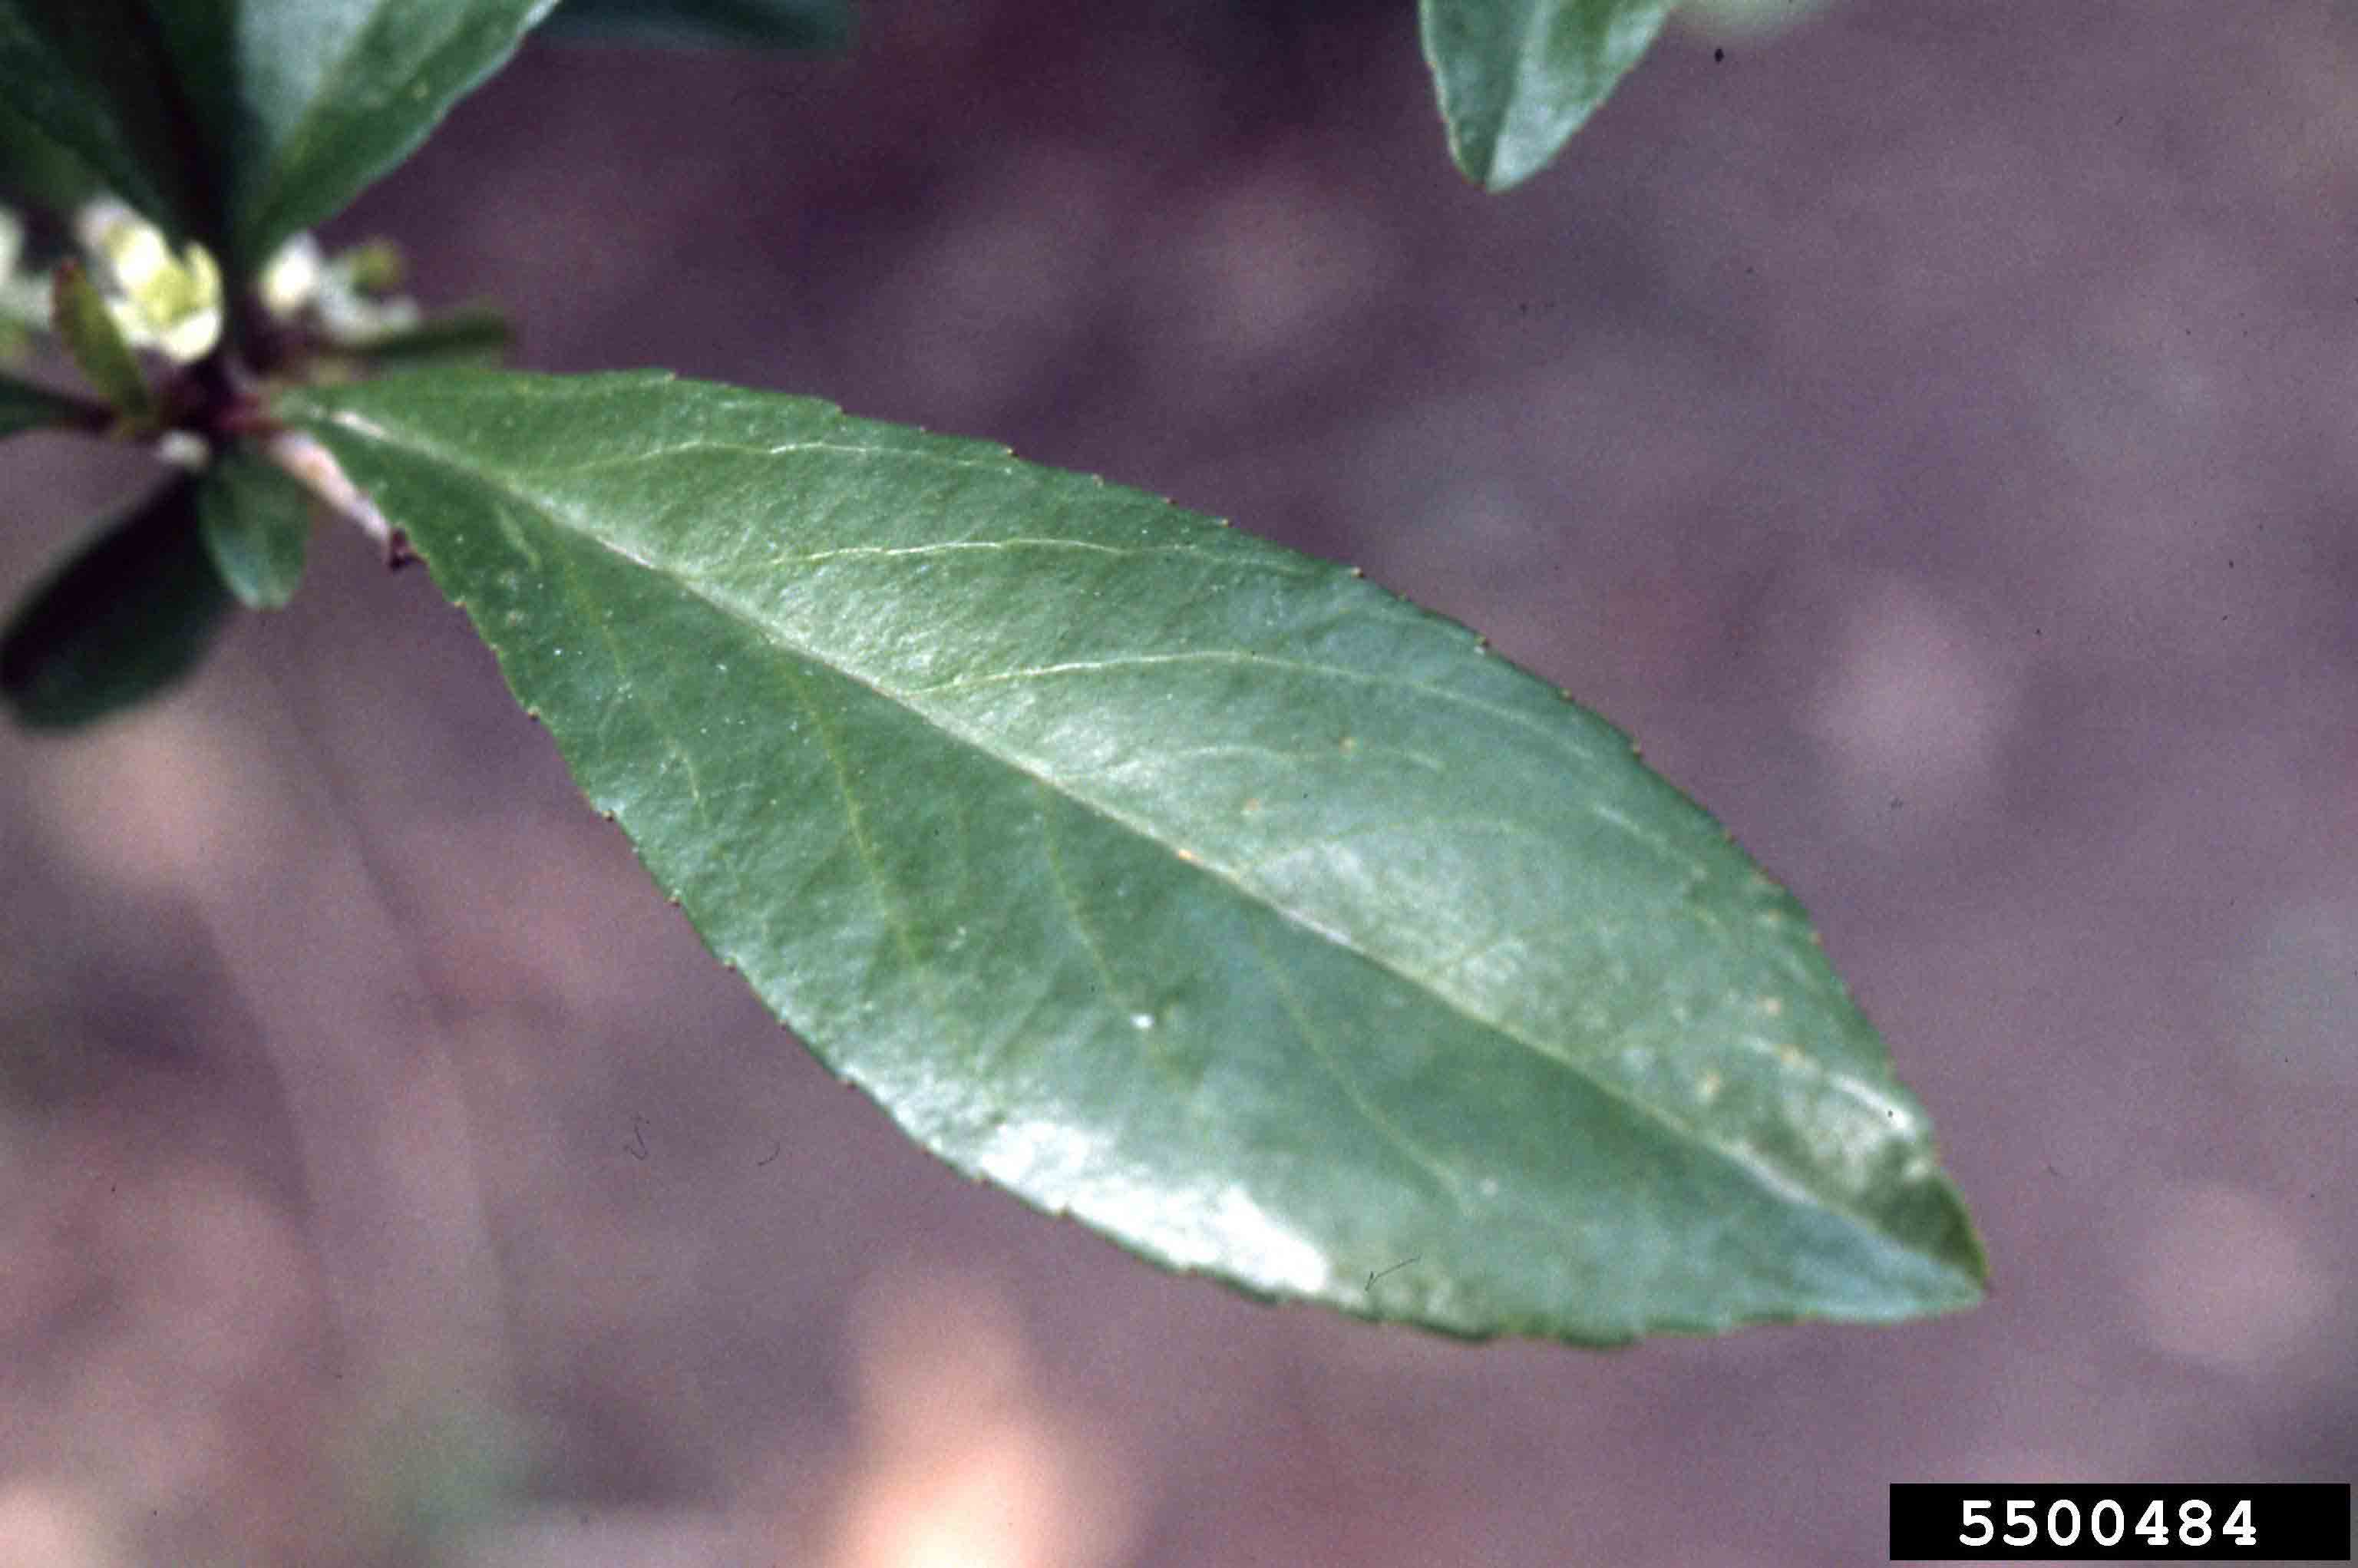 Possumhaw holly leaf, 1.5"-3" long, with rounded teeth on margins